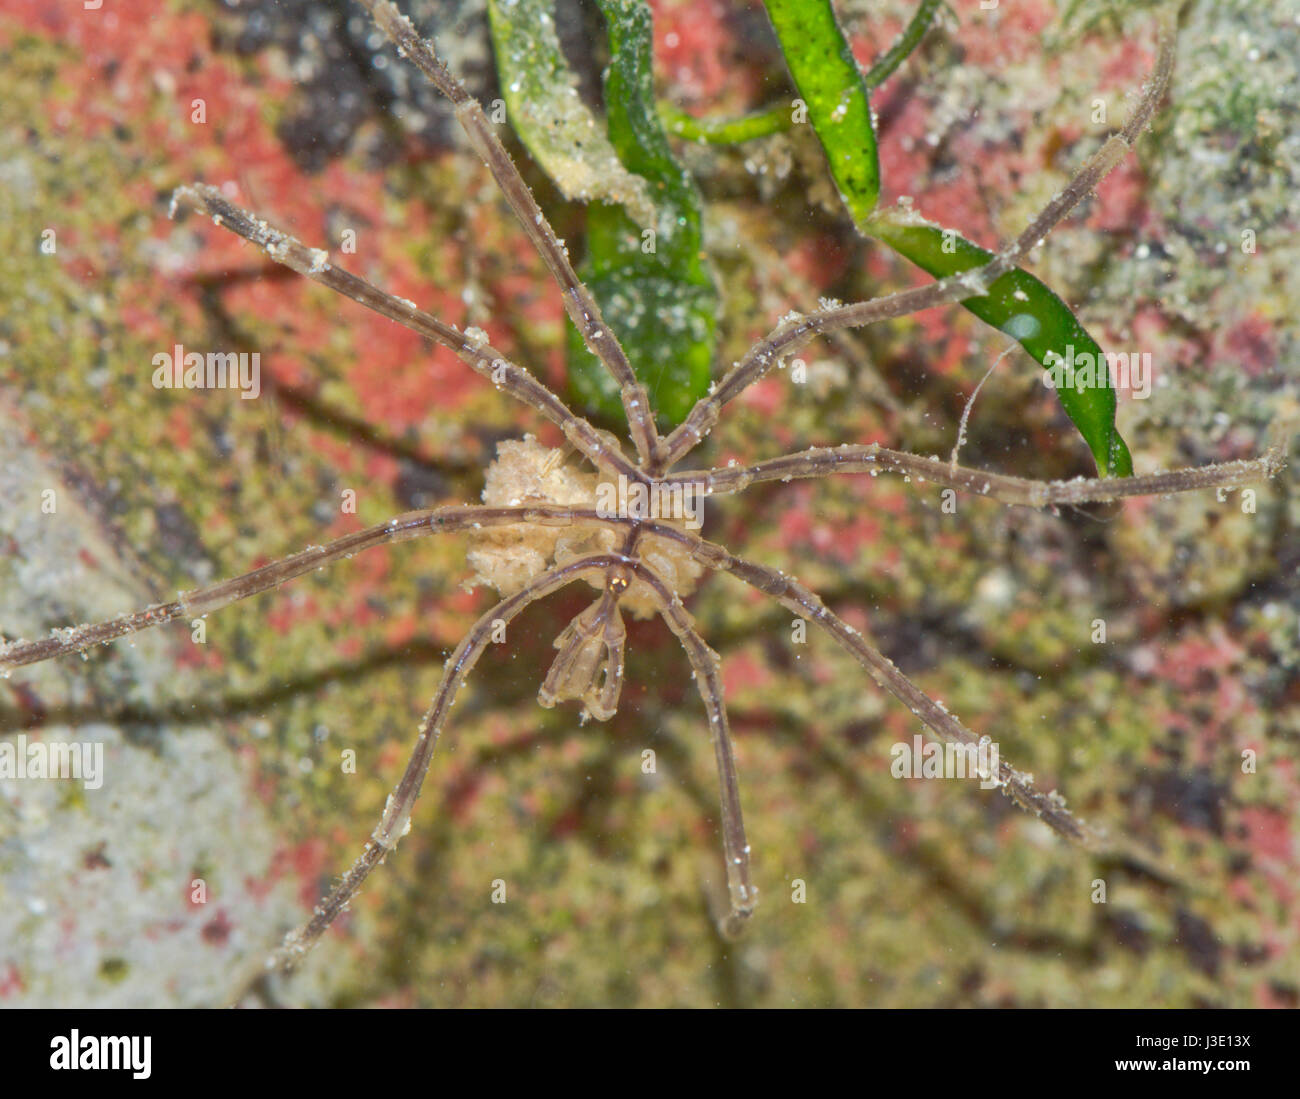 Sea Spider (Nymphon sp) Male Carrying Eggs Stock Photo